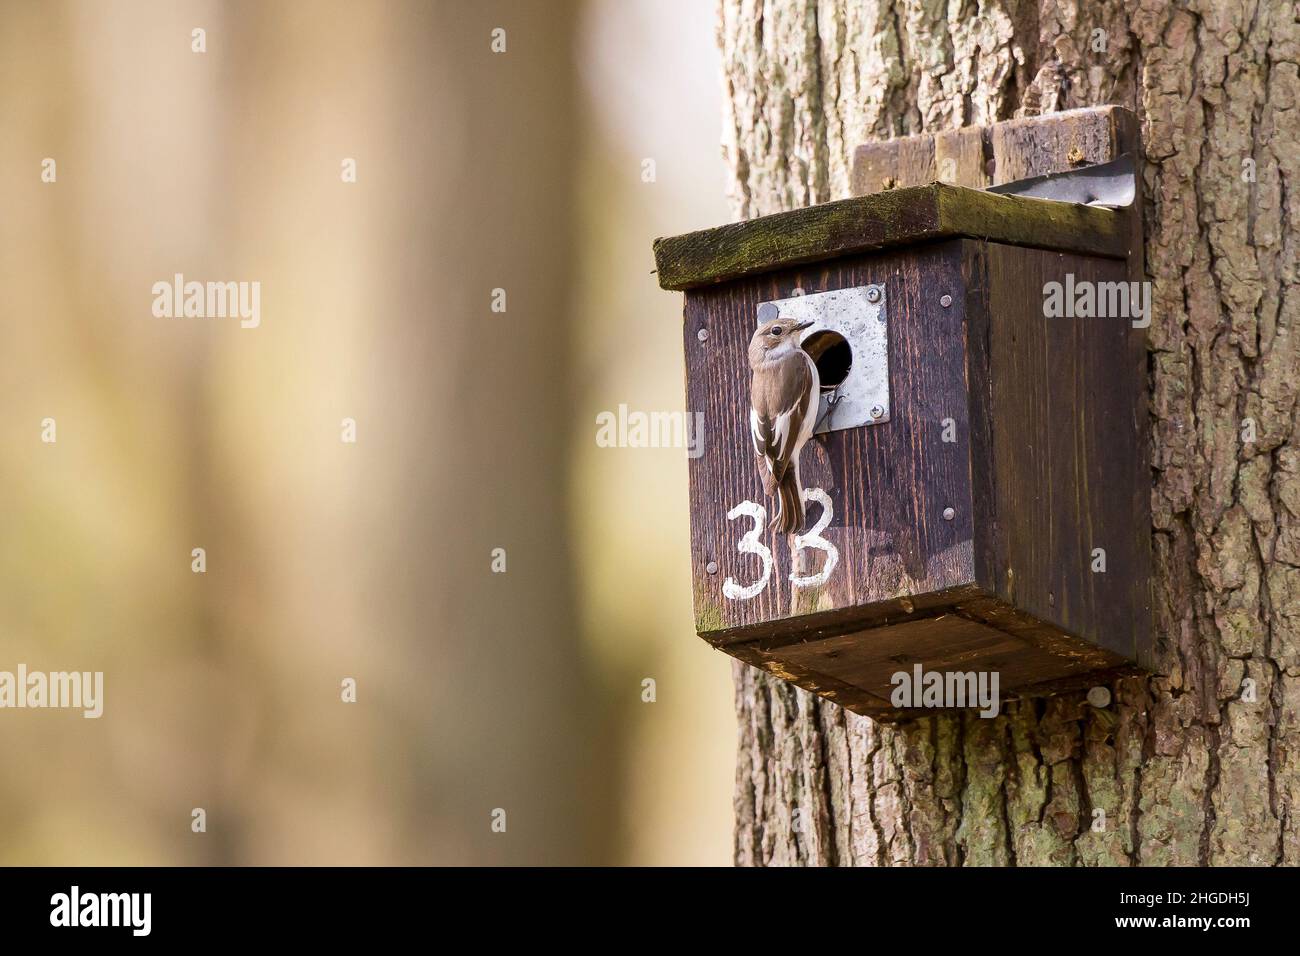 Female pied flycatcher bird bringing nesting material to a nesting box in UK woodland, in spring. Stock Photo